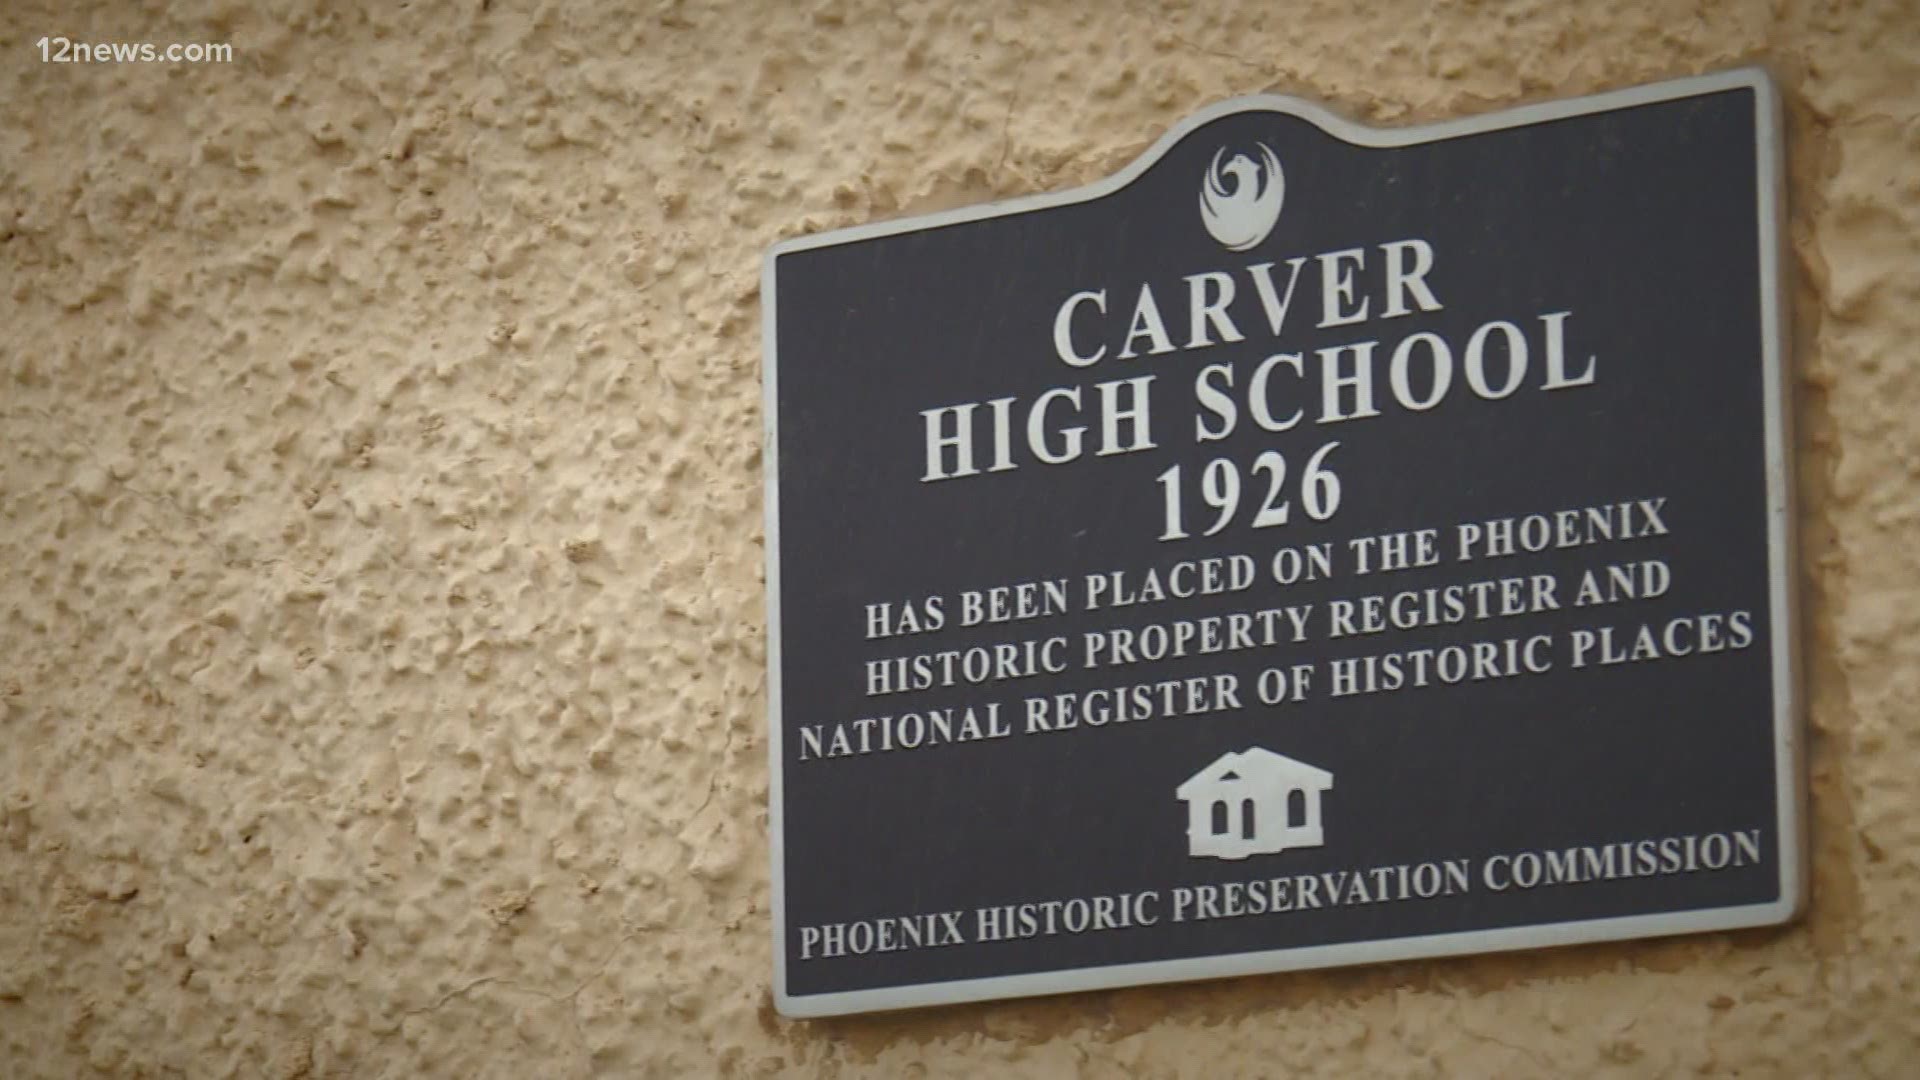 The Carver Museum was once Arizona's only high school for Black students. It is now a museum dedicated to telling the stories of African Americans in Arizona.